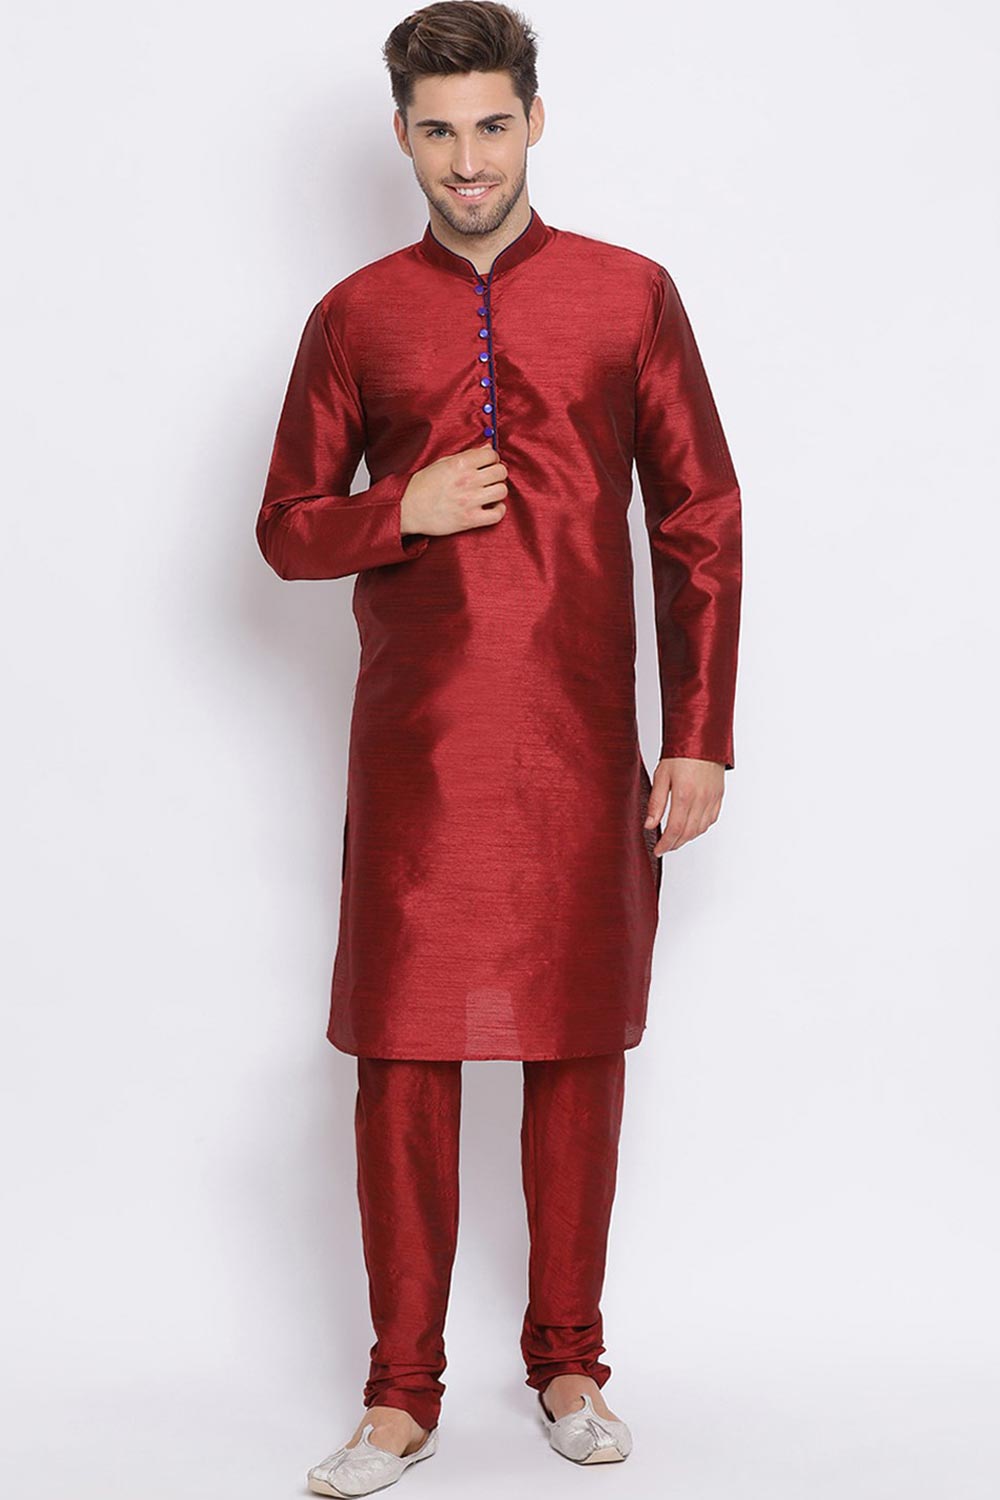 Black Buttoned Sherwani Indian Clothing in Denver, CO, Aurora, CO, Boulder, CO, Fort Collins, CO, Colorado Springs, CO, Parker, CO, Highlands Ranch, CO, Cherry Creek, CO, Centennial, CO, and Longmont, CO. NATIONWIDE SHIPPING USA- India Fashion X